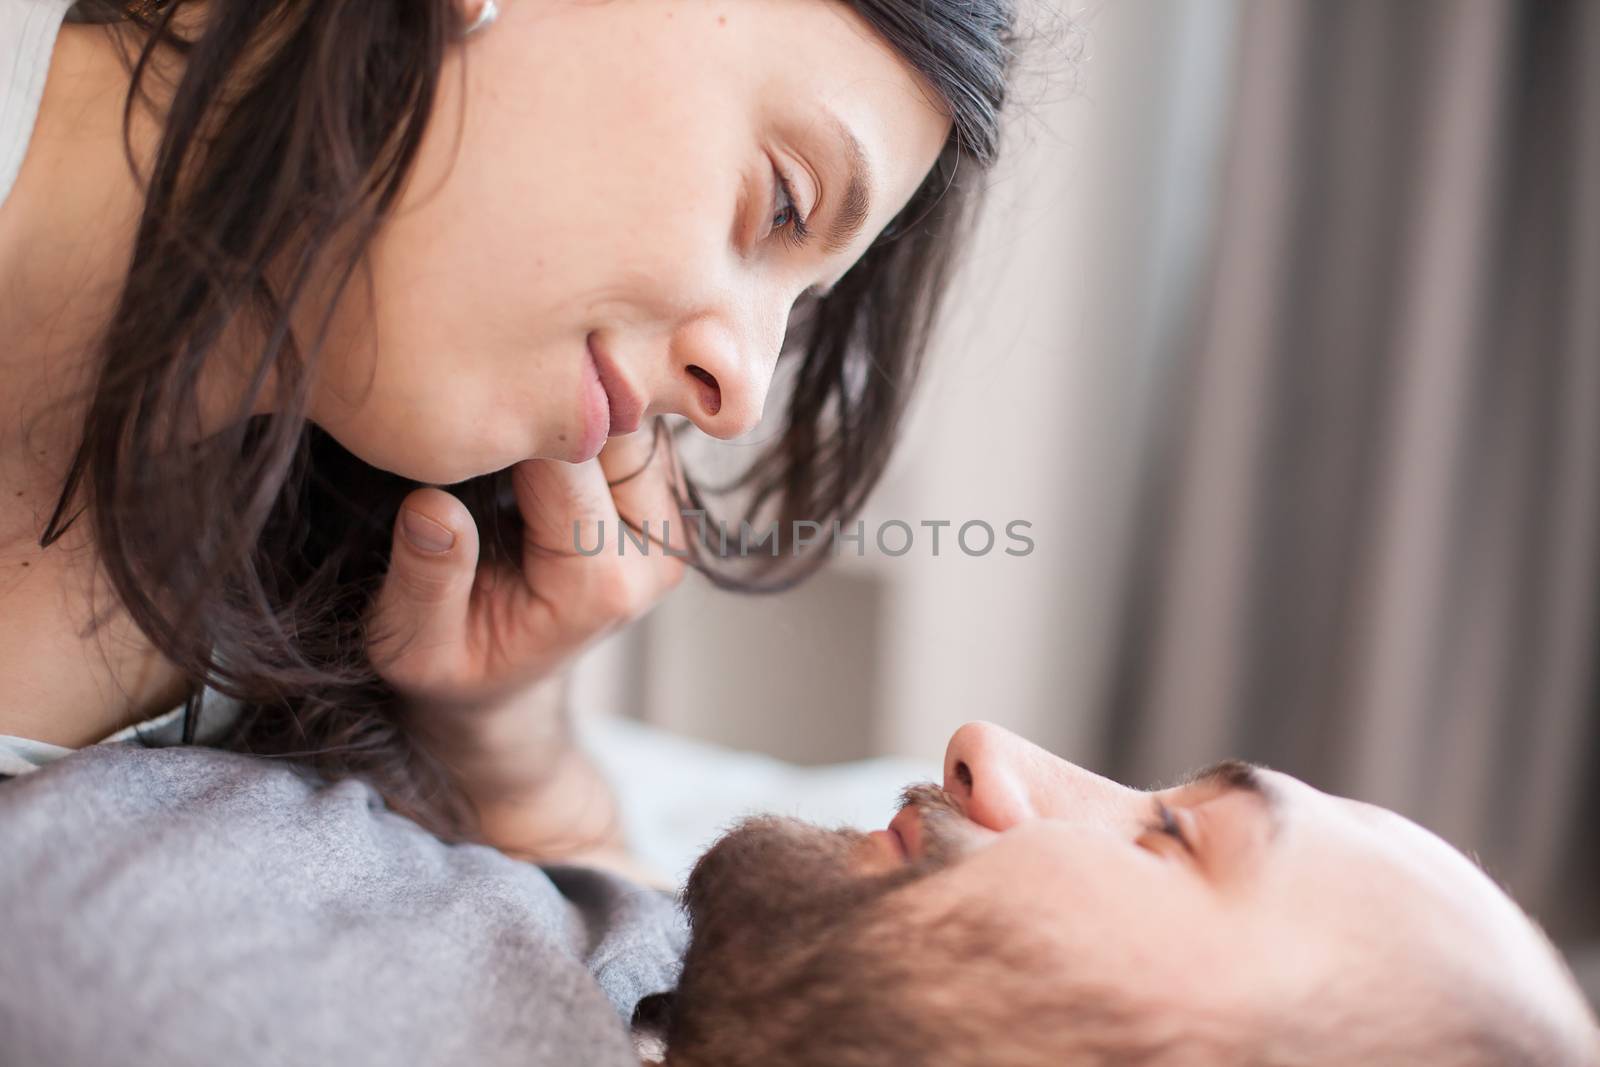 Close up of romantic couple looking at each other eyes after waking up.